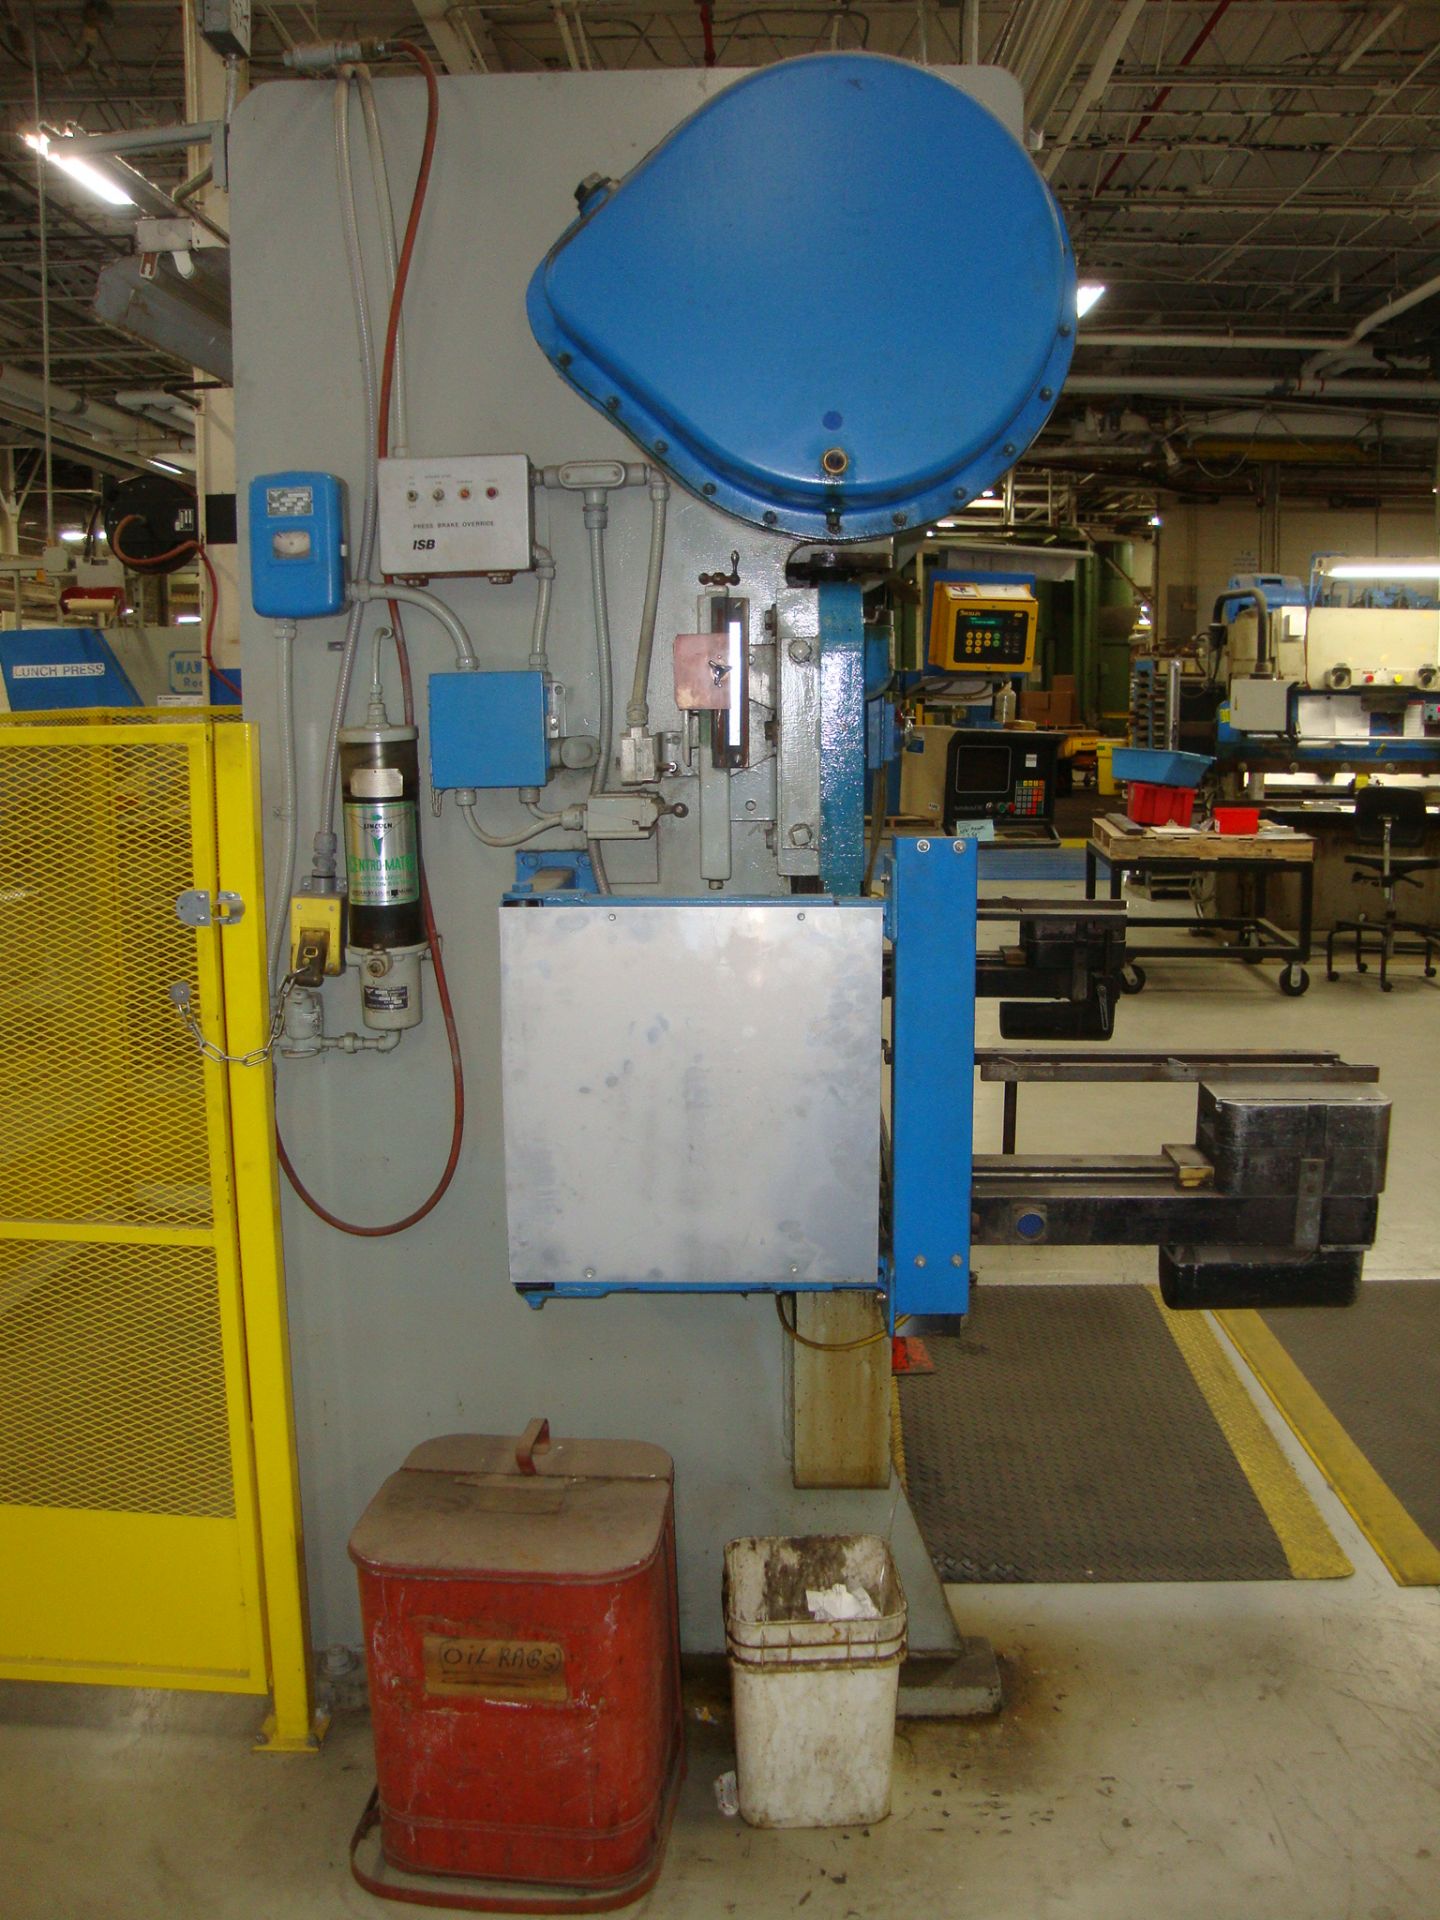 Verson 65 Ton 8' Press Versomatic w/Merlin Safety System, Serial # 22691-206.65, approx. 132" x - Image 30 of 57